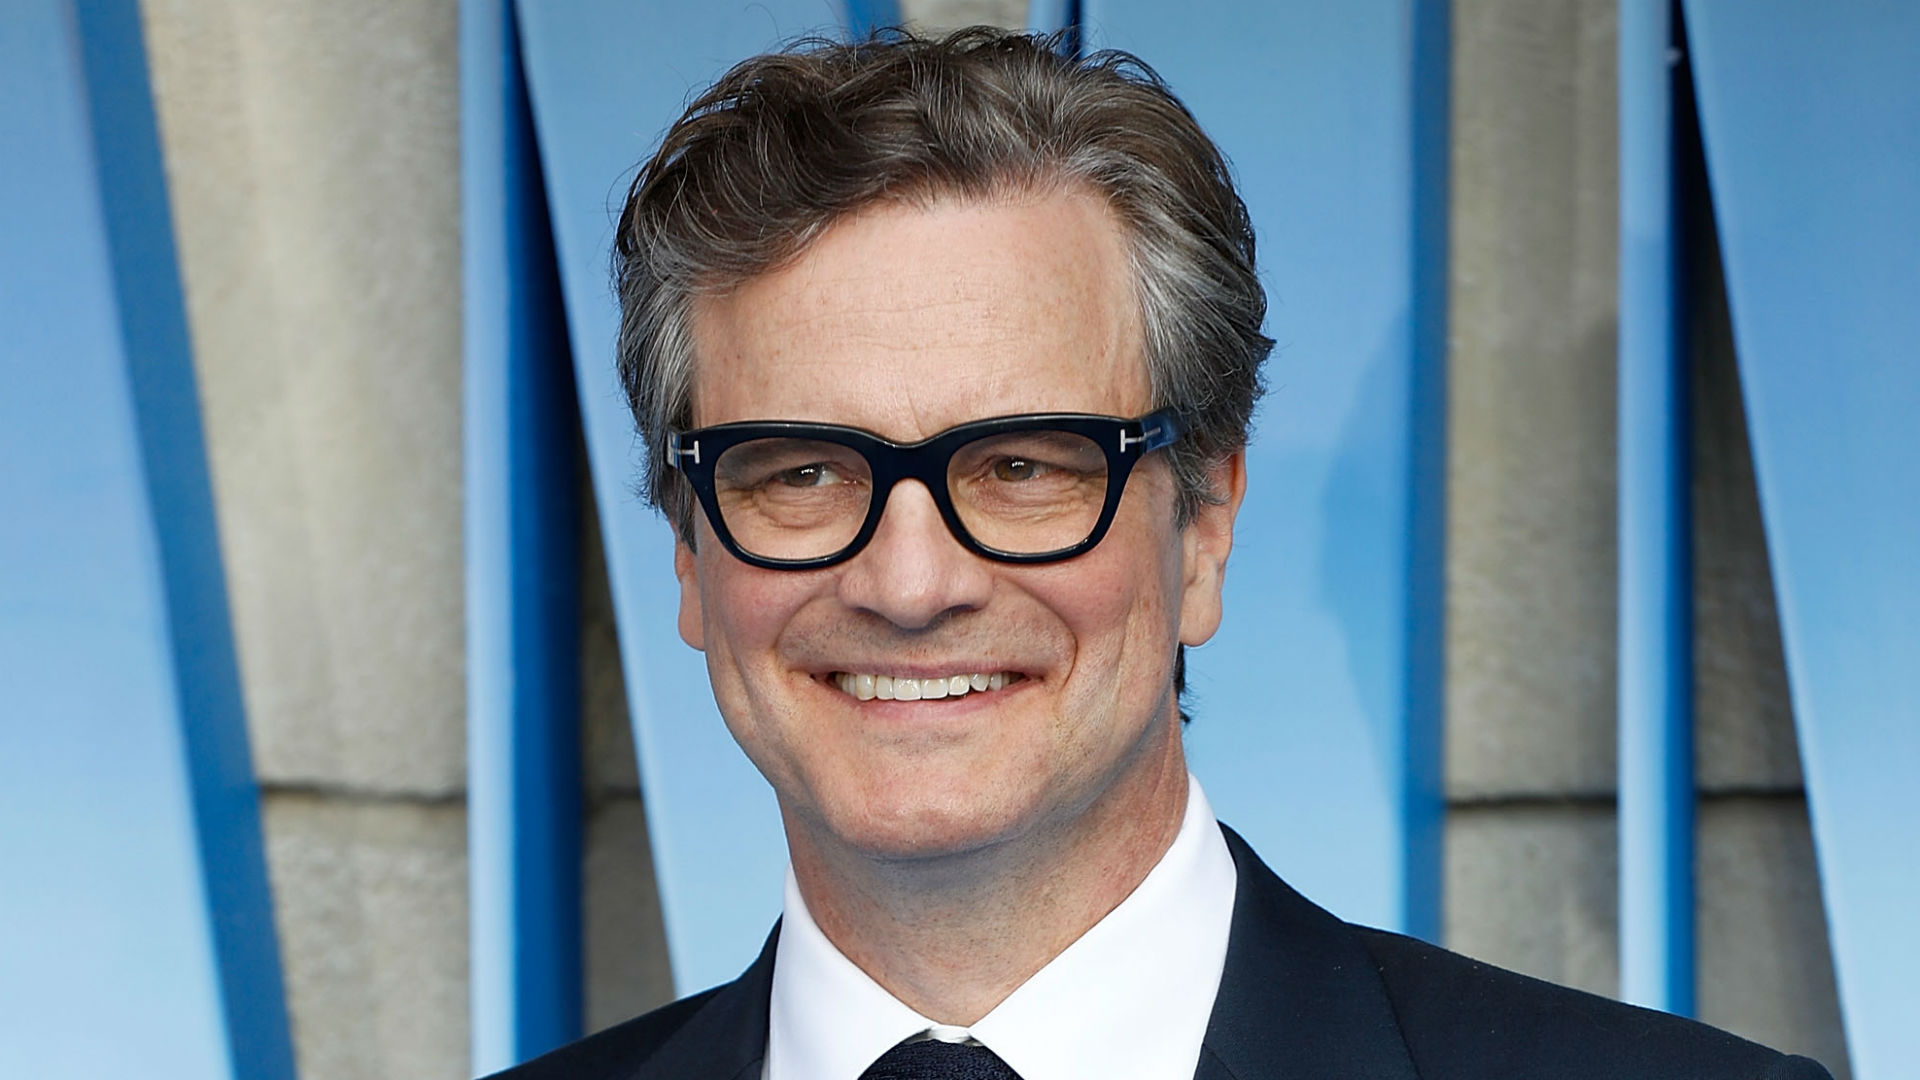 Colin Firth Shares Thoughts on Another 'Mamma Mia!' Movie: 'I Suppose There Are More Songs'